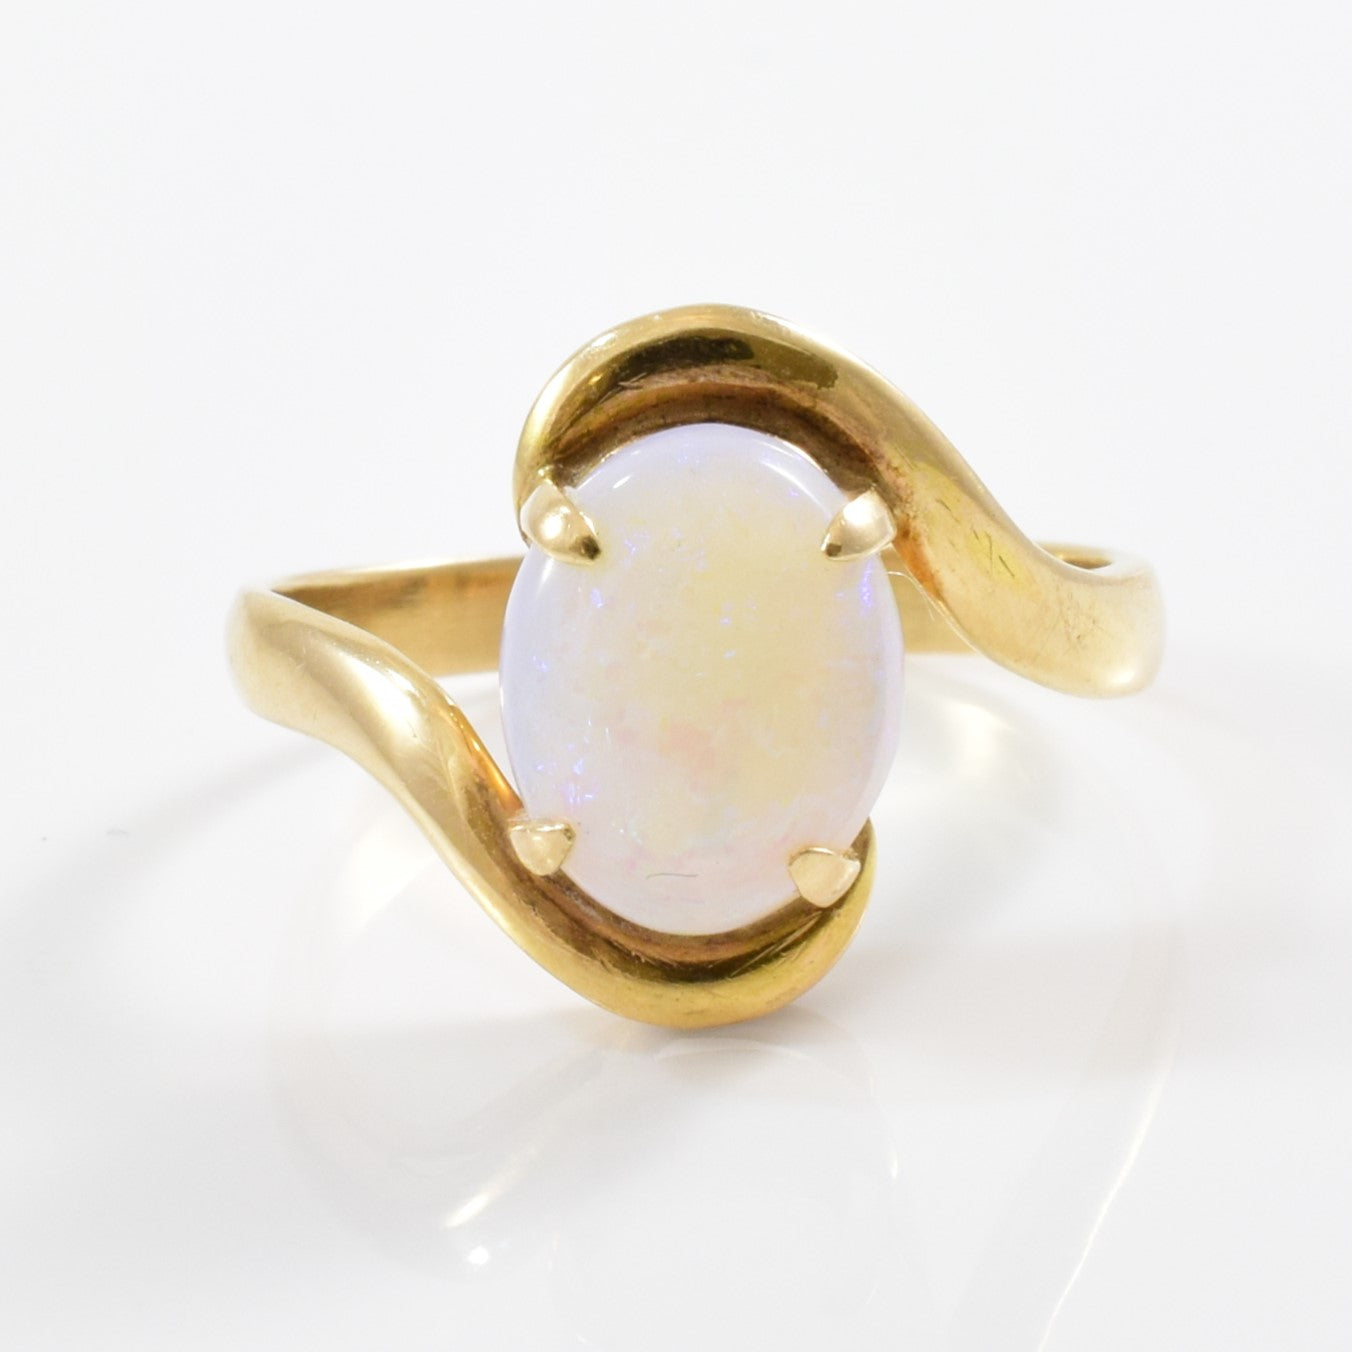 Bypass Oval Cabochon Opal Ring | SZ 6.75 |